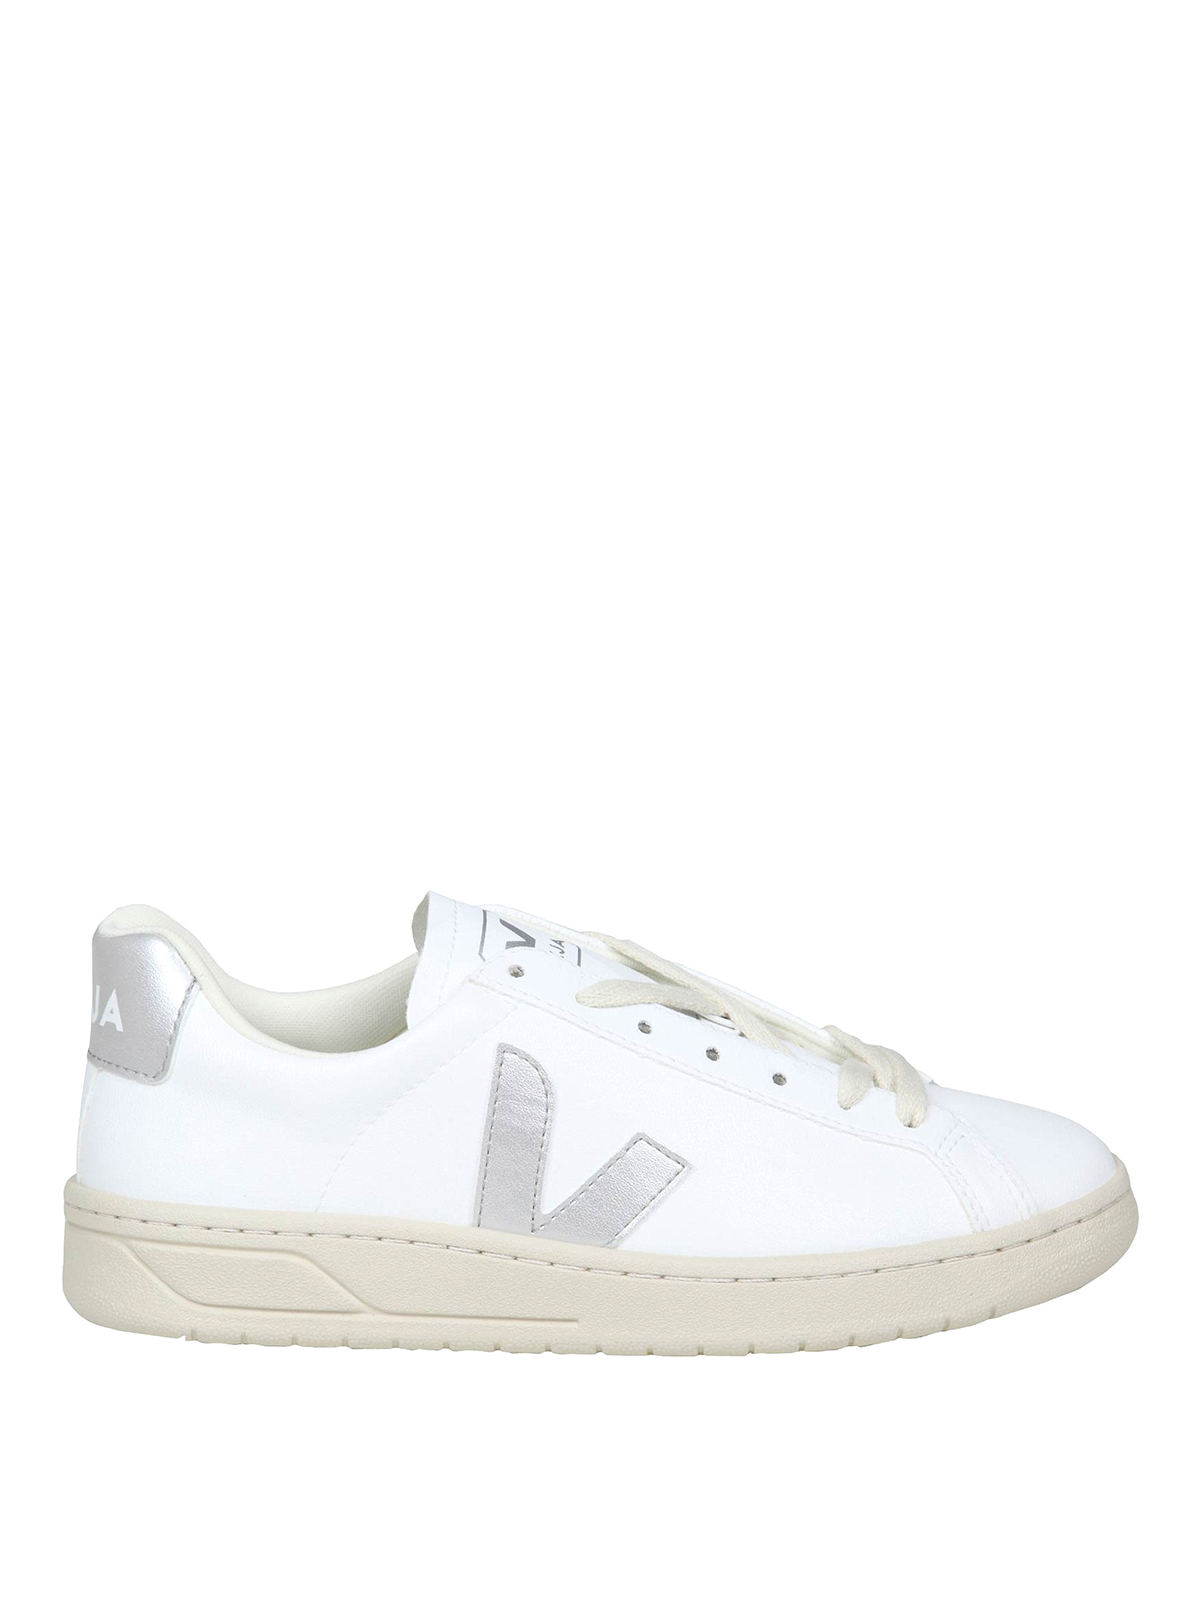 Veja Urca Sneakers In White And Silver